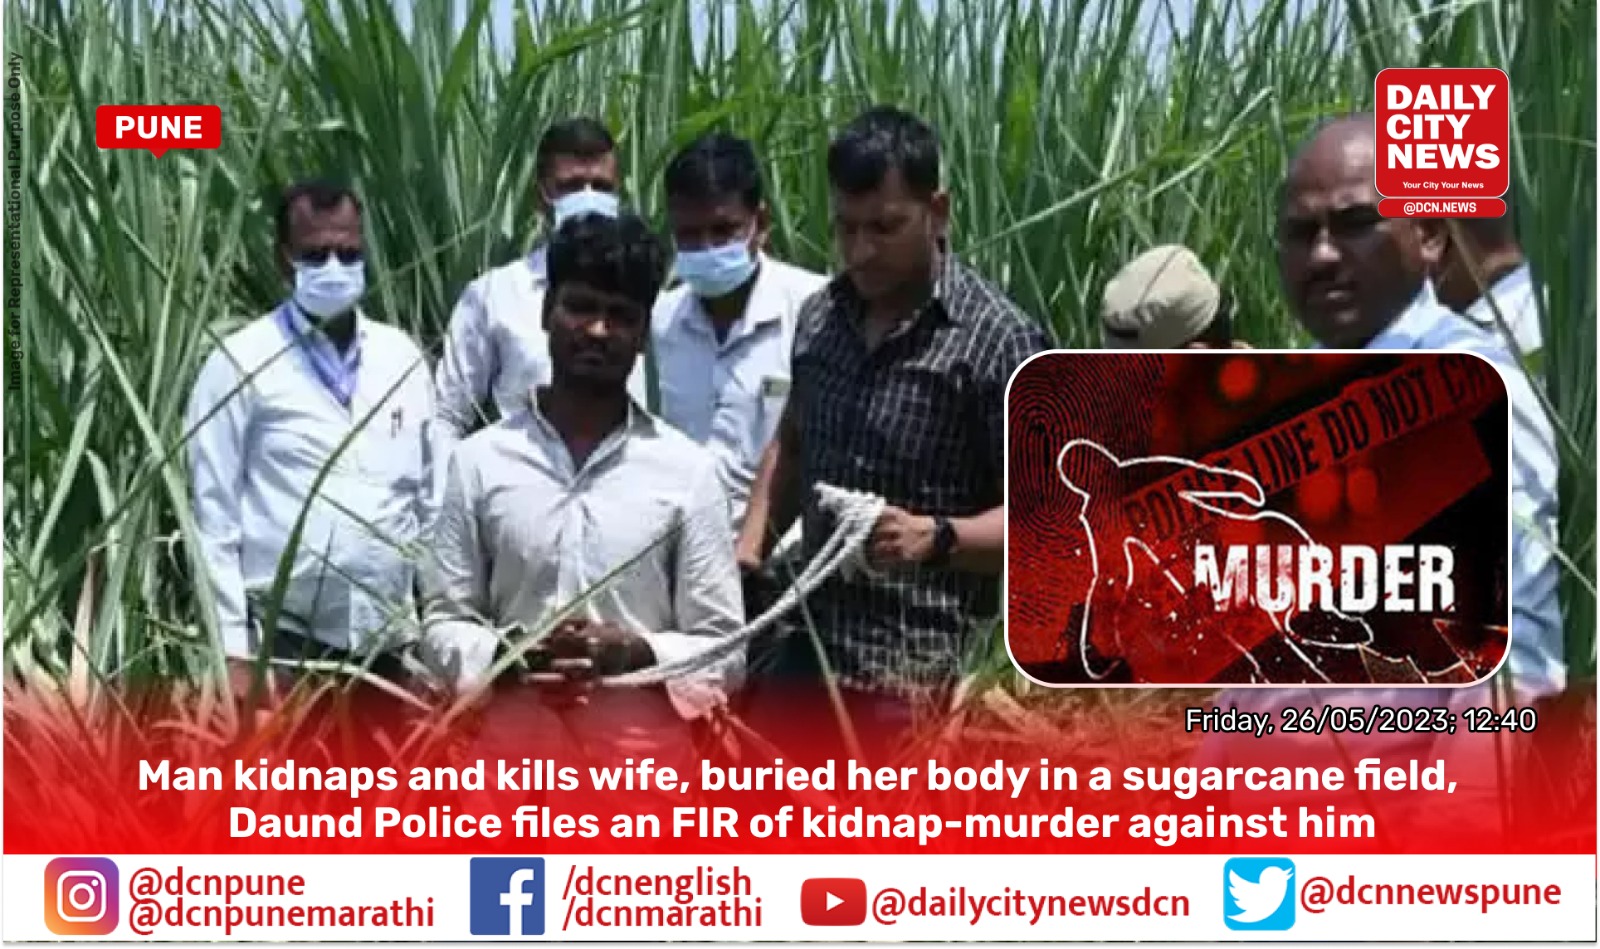 Man kidnaps and kills wife, buried her body in a sugarcane field, Daund Police files an FIR of kidnap-murder against him